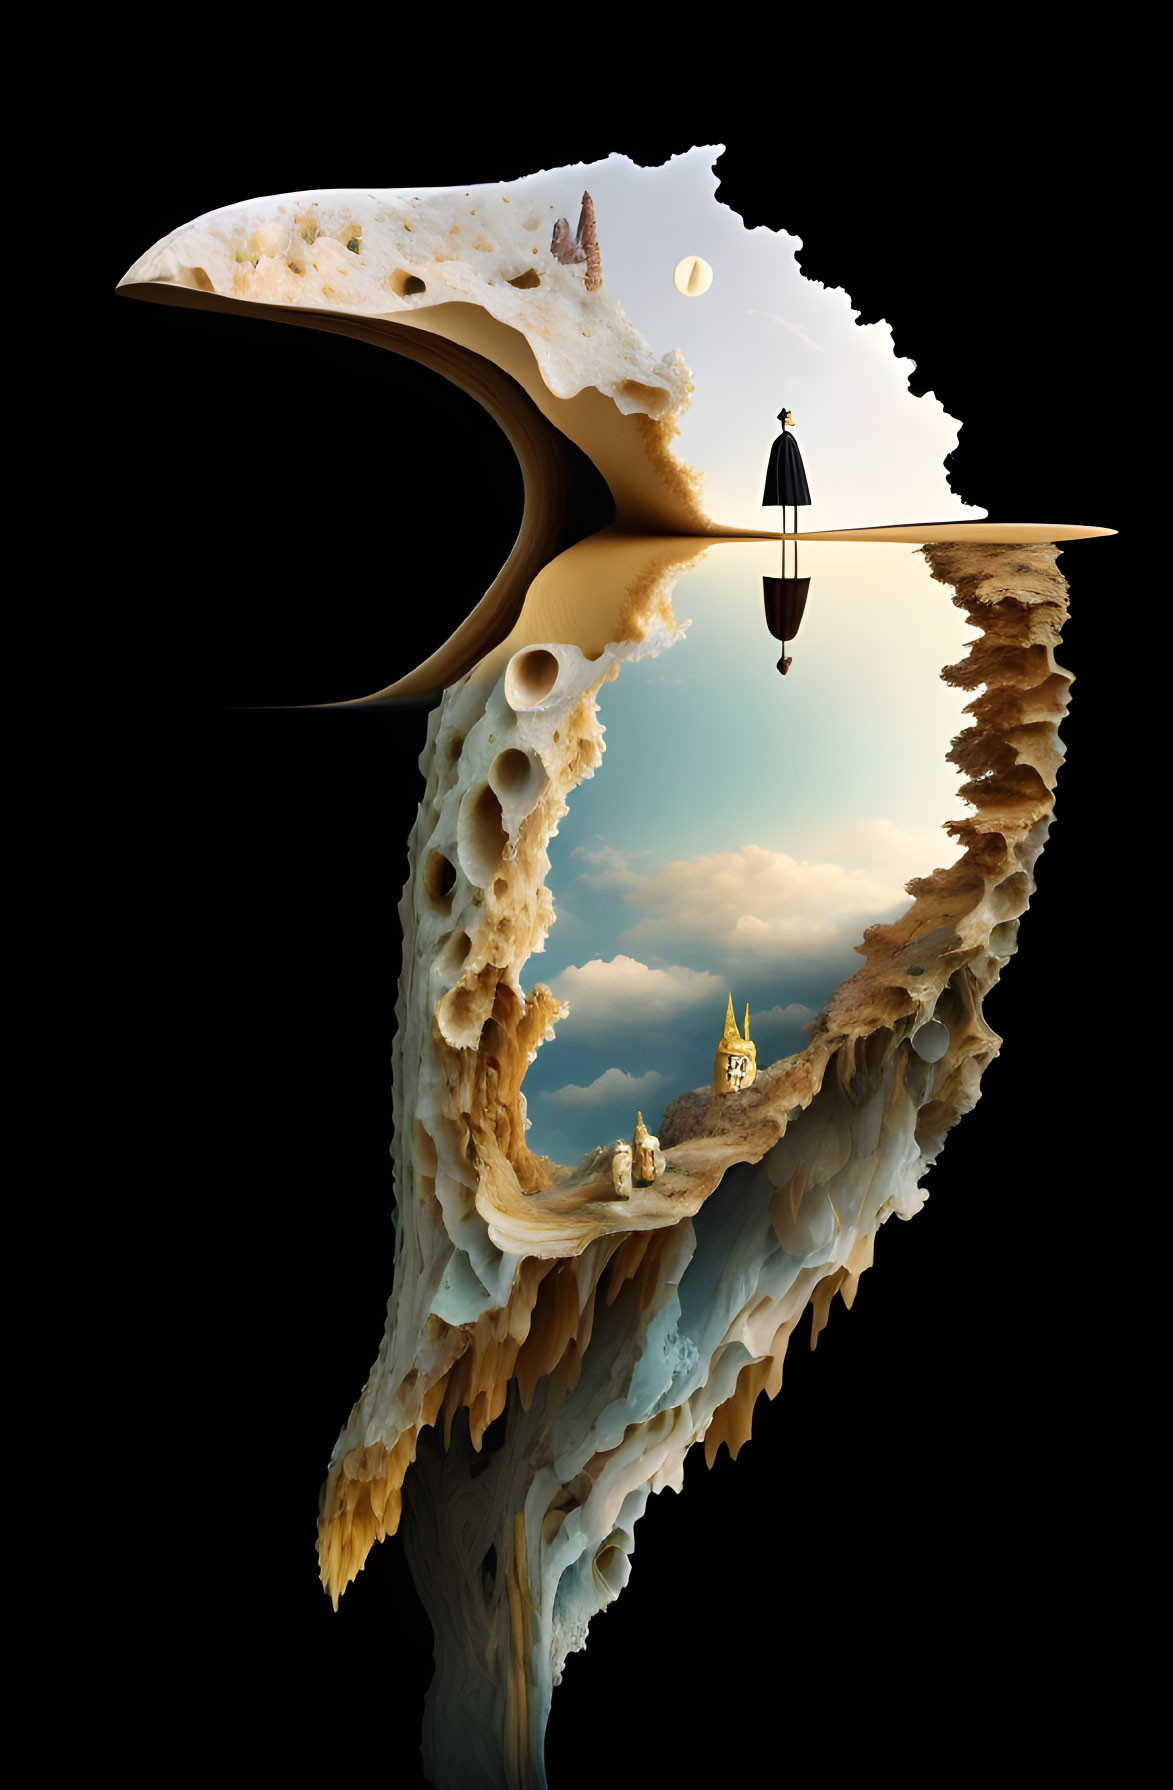 Surreal Artwork: Person on Cliff in Cityscape-Cavern Cross-Section